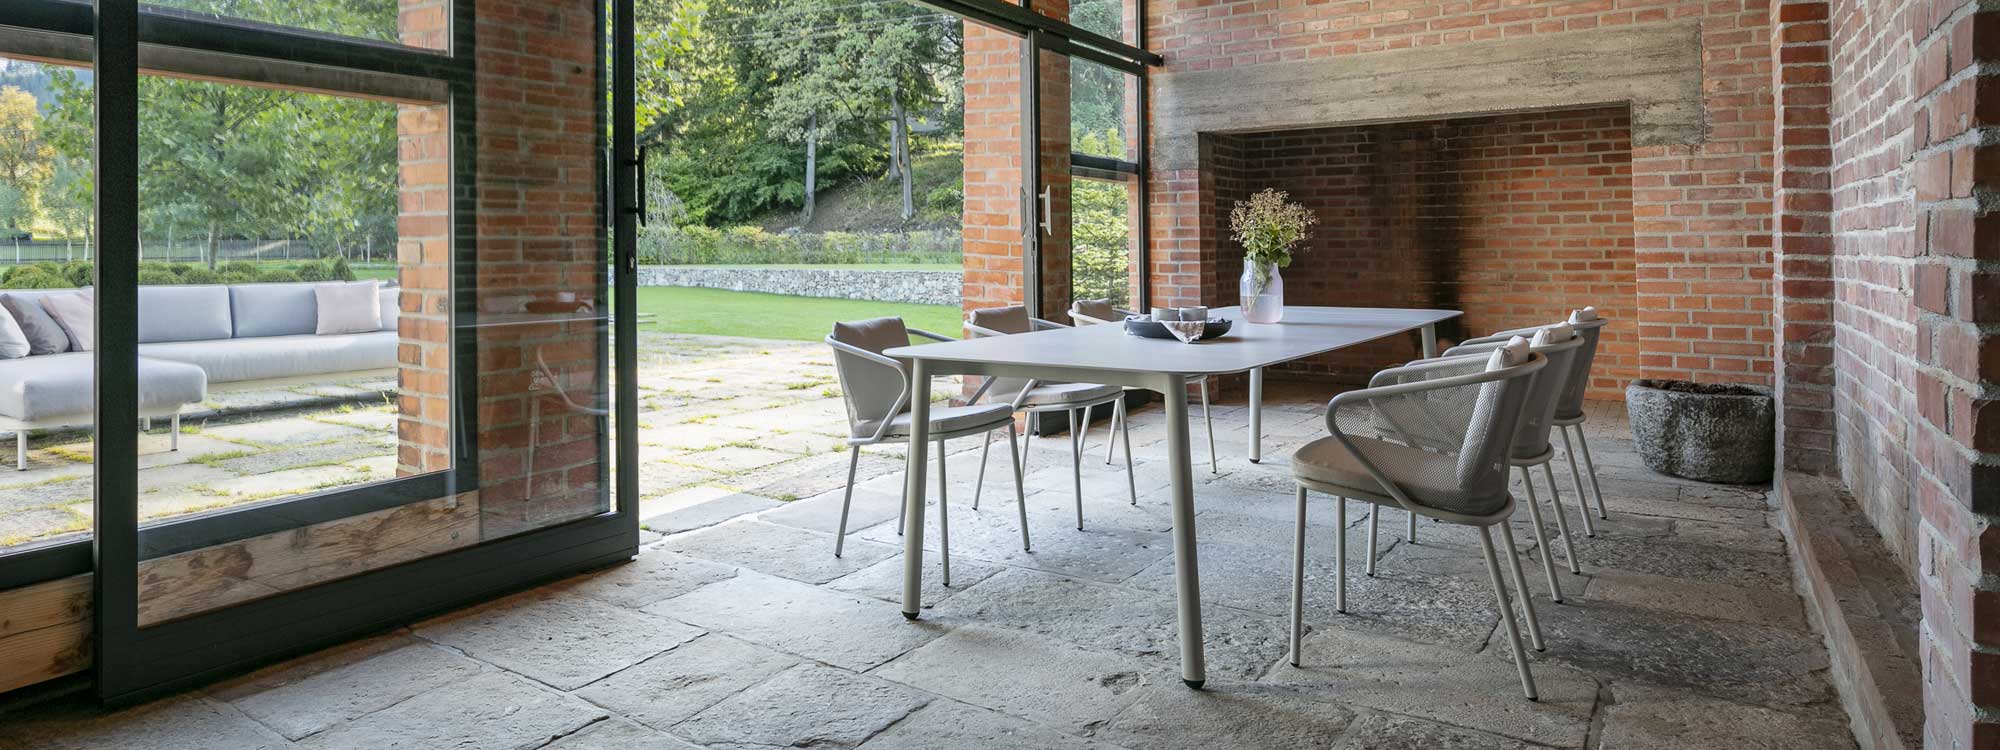 Image of Starling white garden dining table and Condor white outdoor chairs in rustic garden room